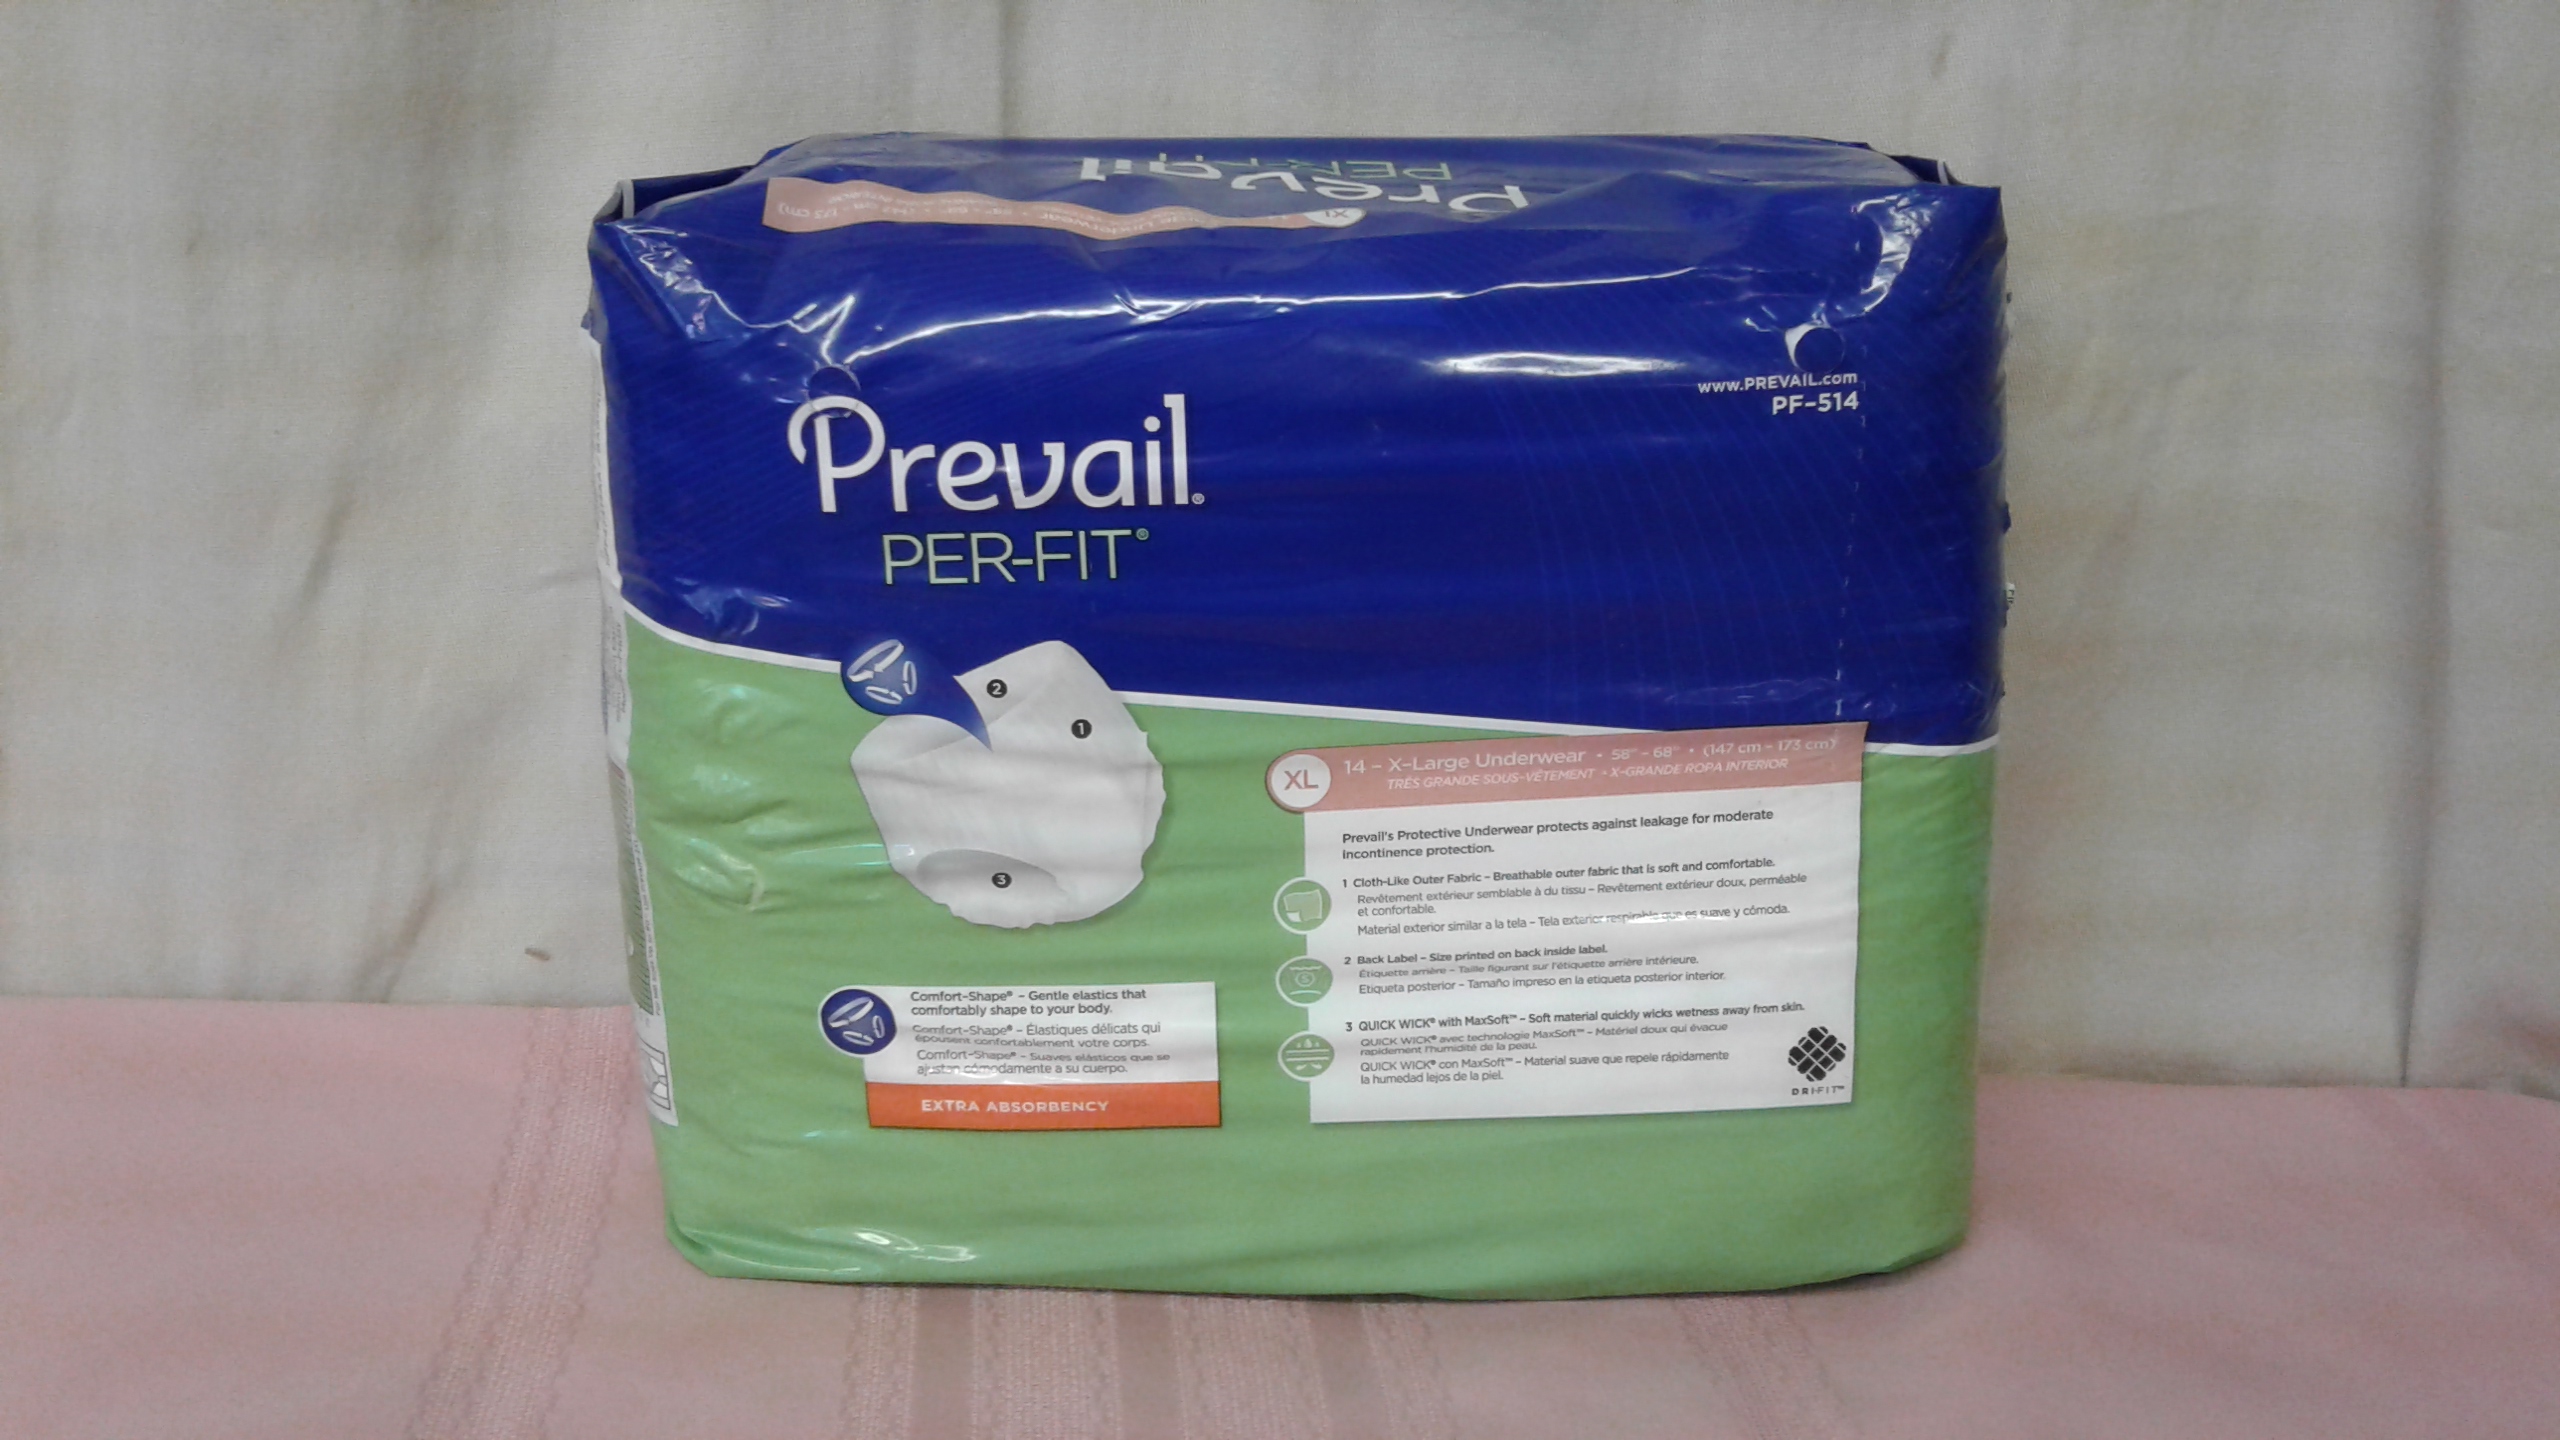 Prevail Per-Fit for Women Protective Underwear - Extra Absorbency - La